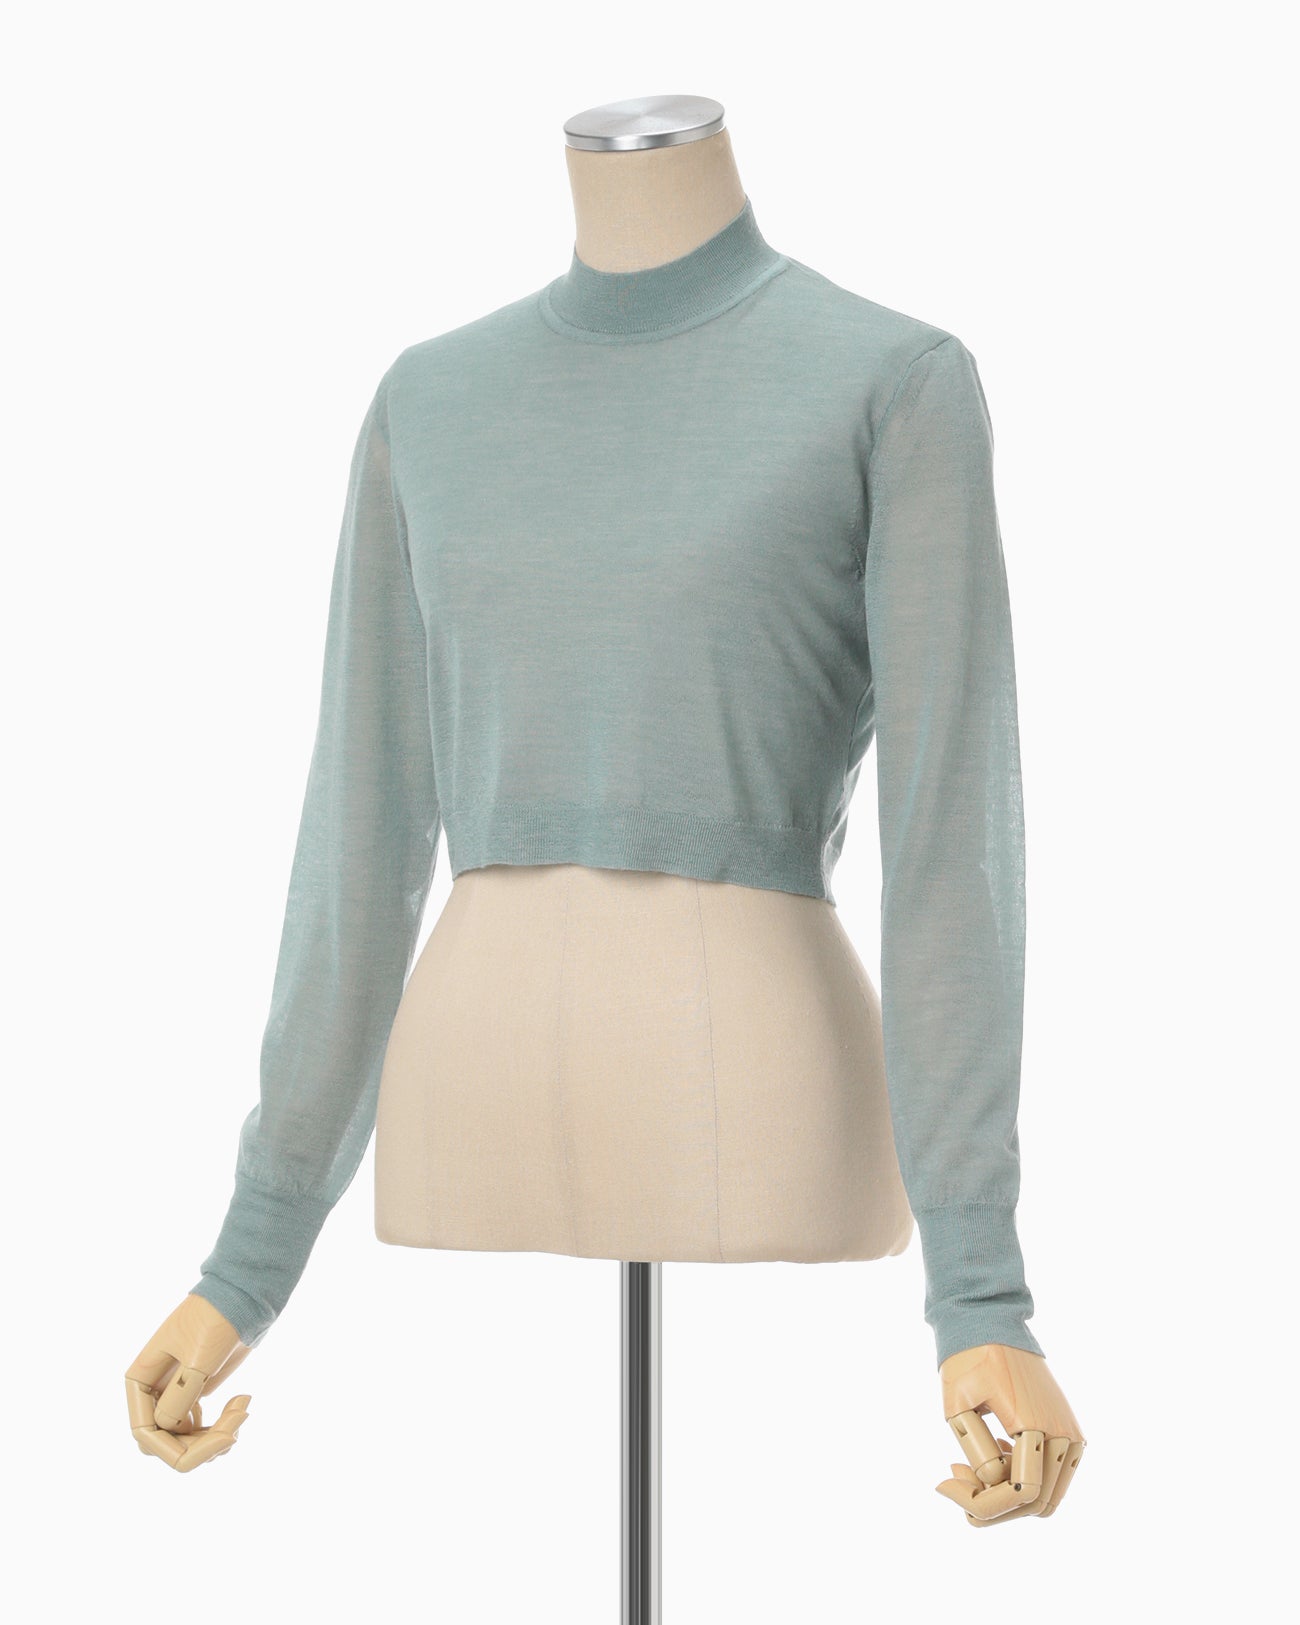 Silk Cashmere Knitted Top - mint green